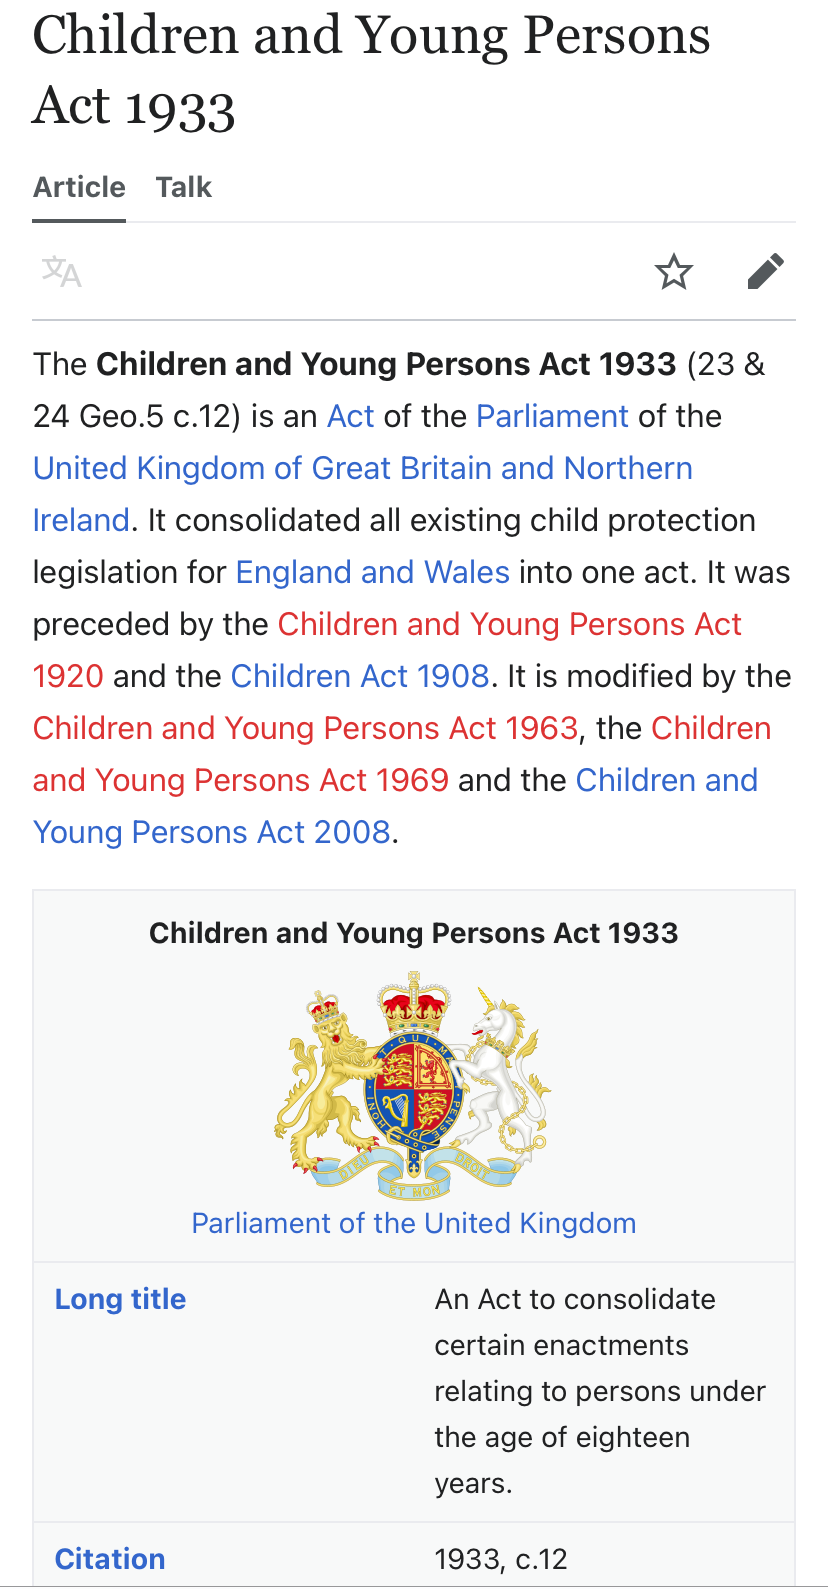 Children and Young Persons Act 1933 Blank Meme Template